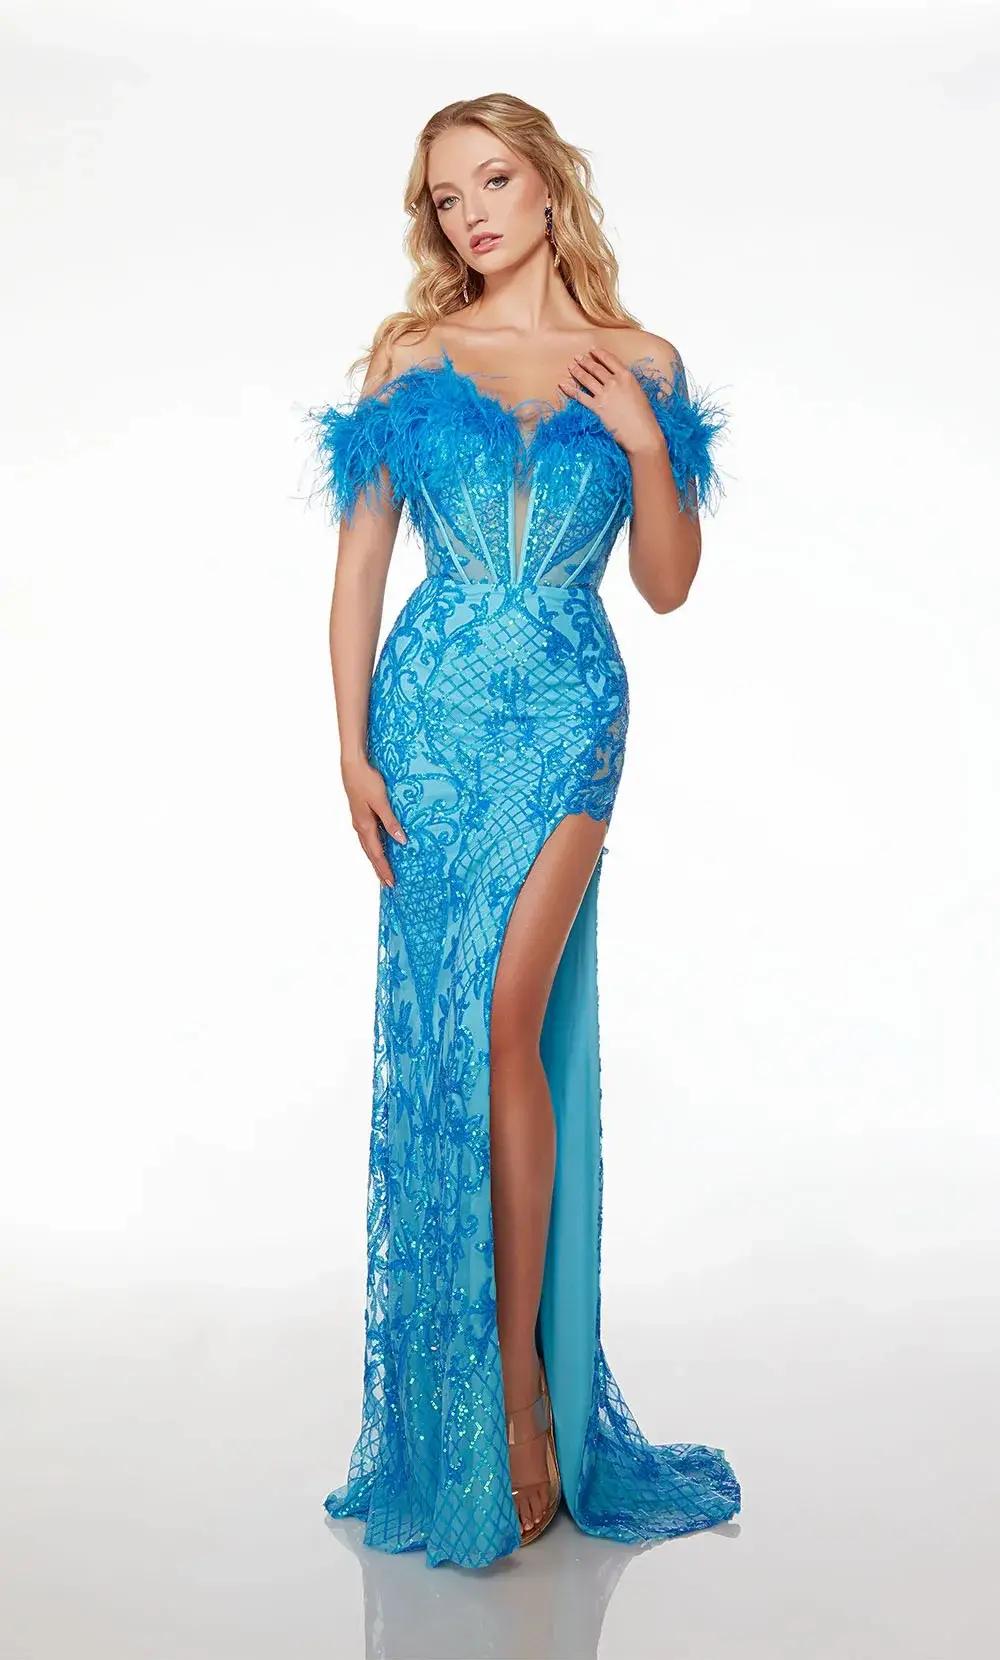 Trendy Vibrant Colors: Alyce Paris&#39; Eye-Catching Gowns for Summer Events Image